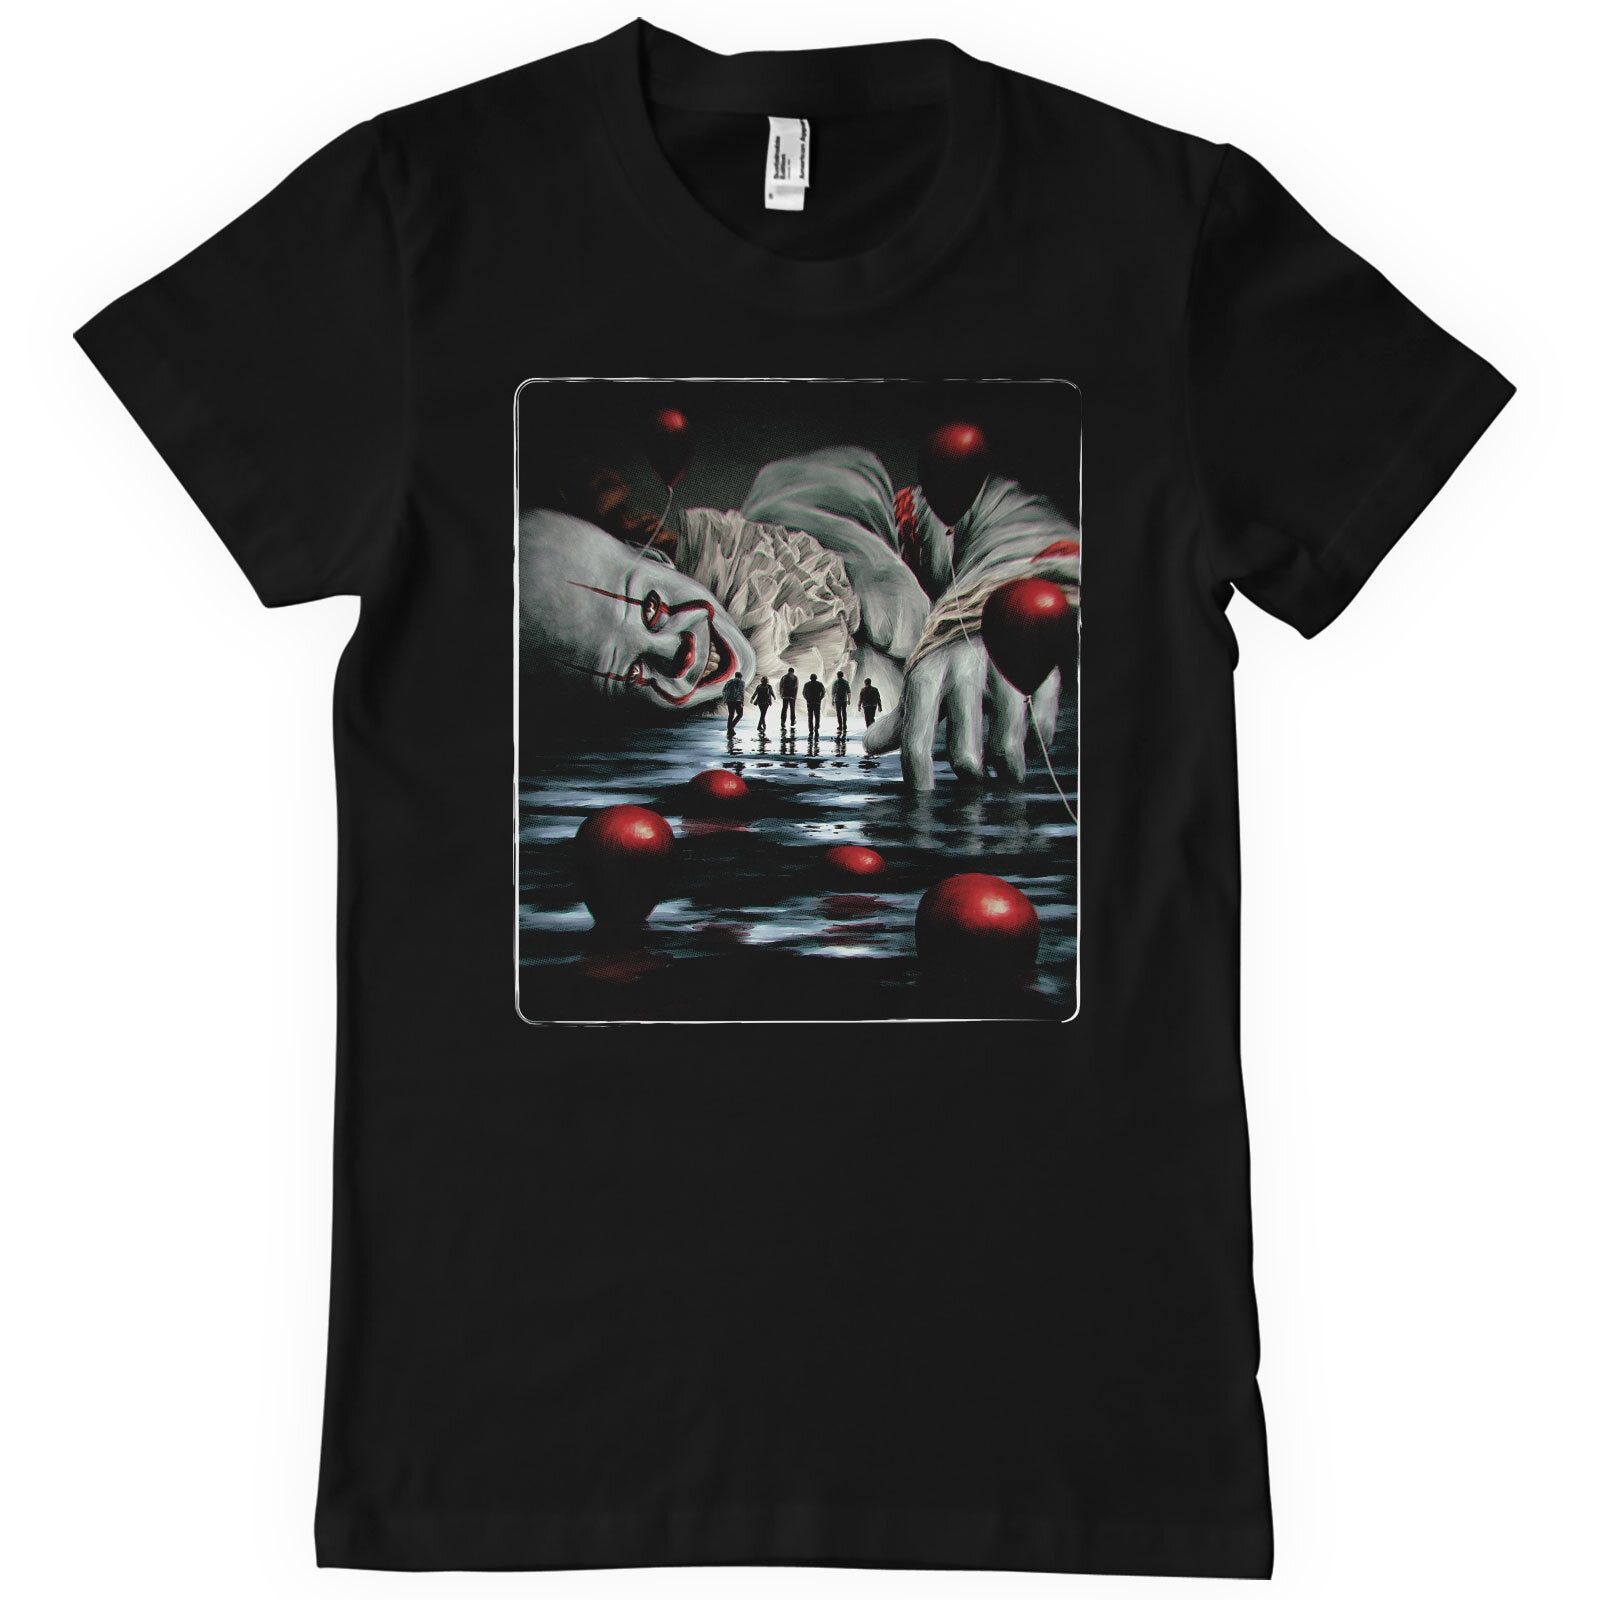 IT - Pennywise Floating T-Shirt